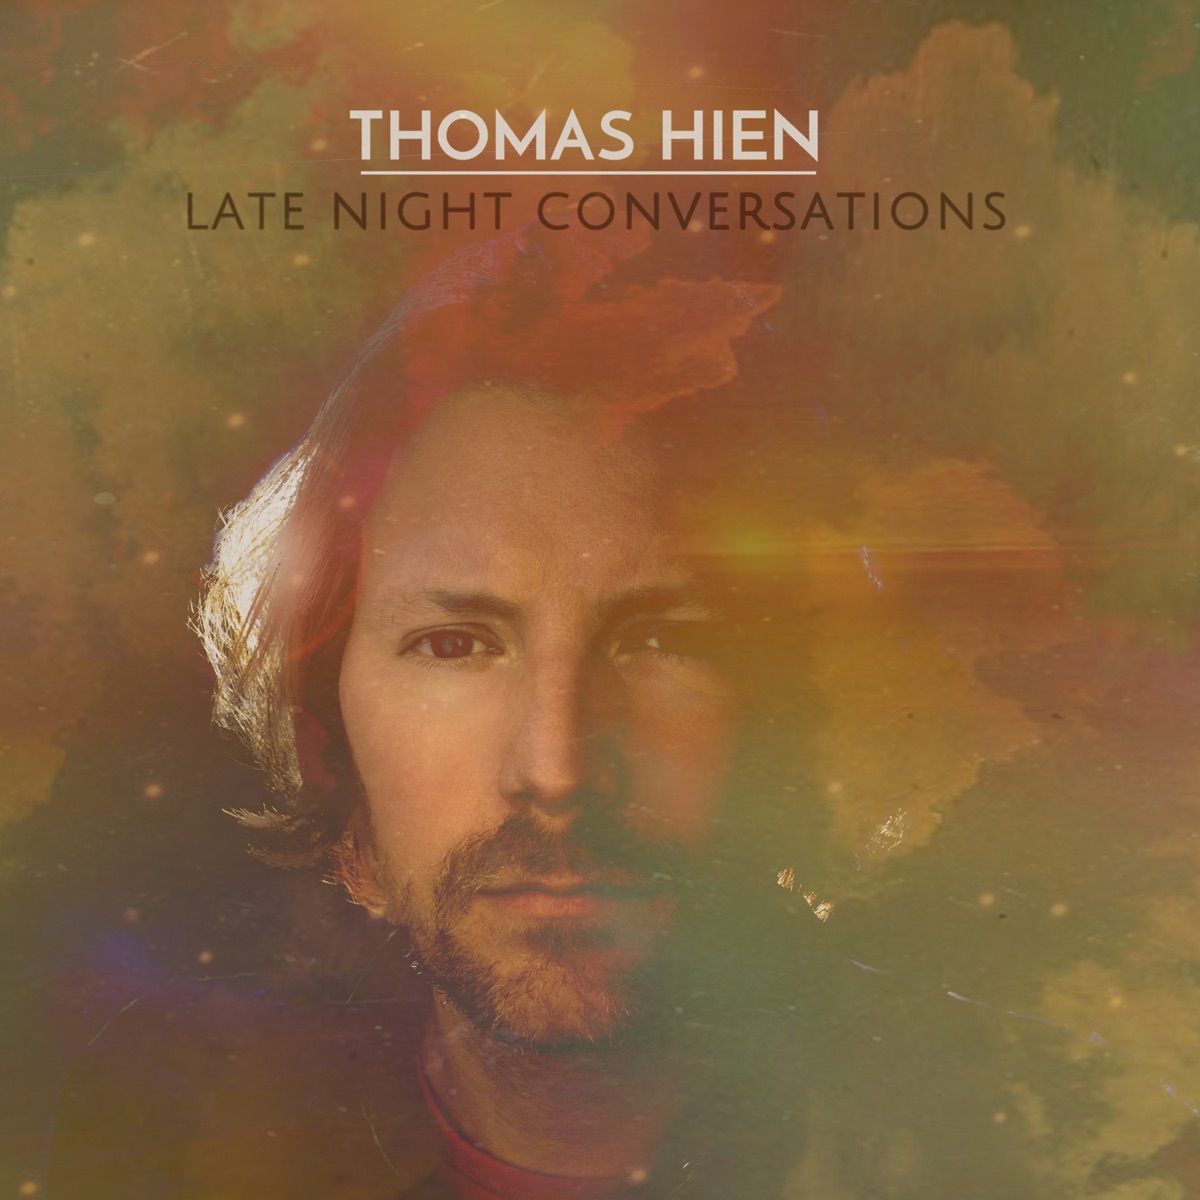 Late Night Conversations by Thomas Hien on Apple Music